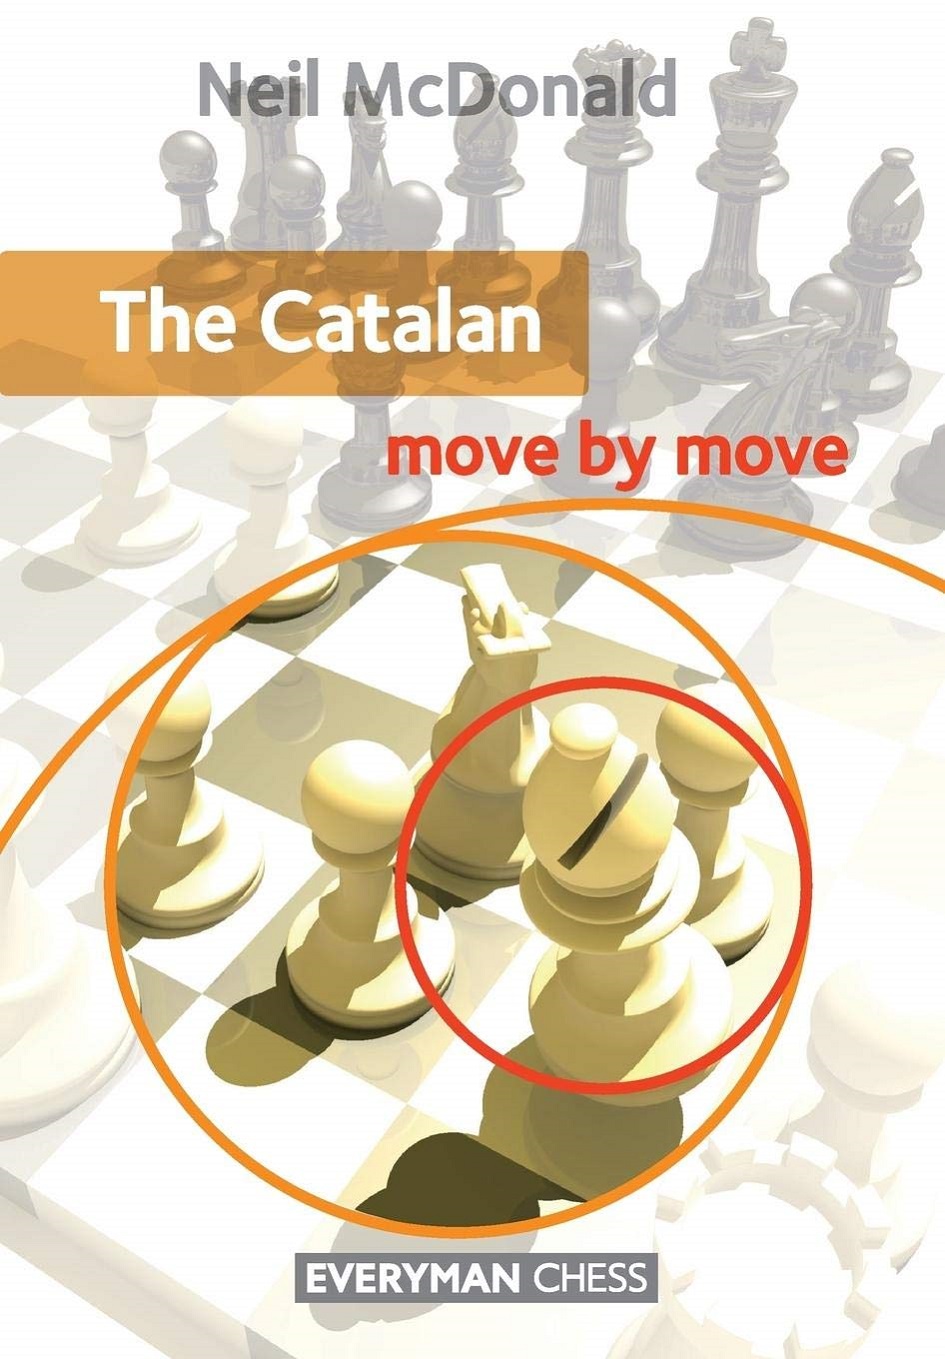 Move by move: the Catalan